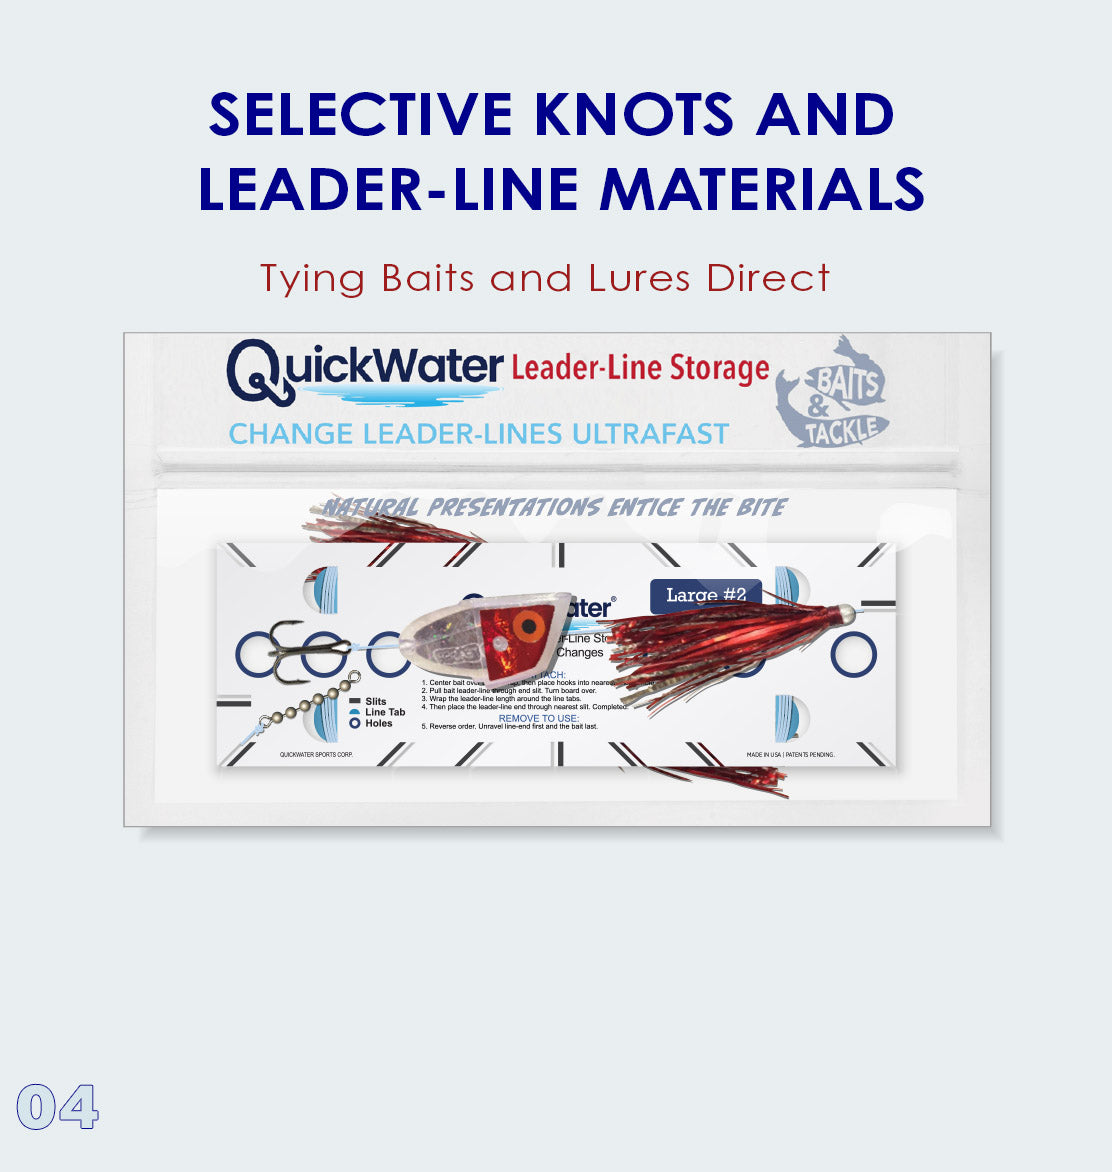 Slide 4: Selective Knots and Leader-Line Materials. Tying Baits and lures direct. image of storage bag.